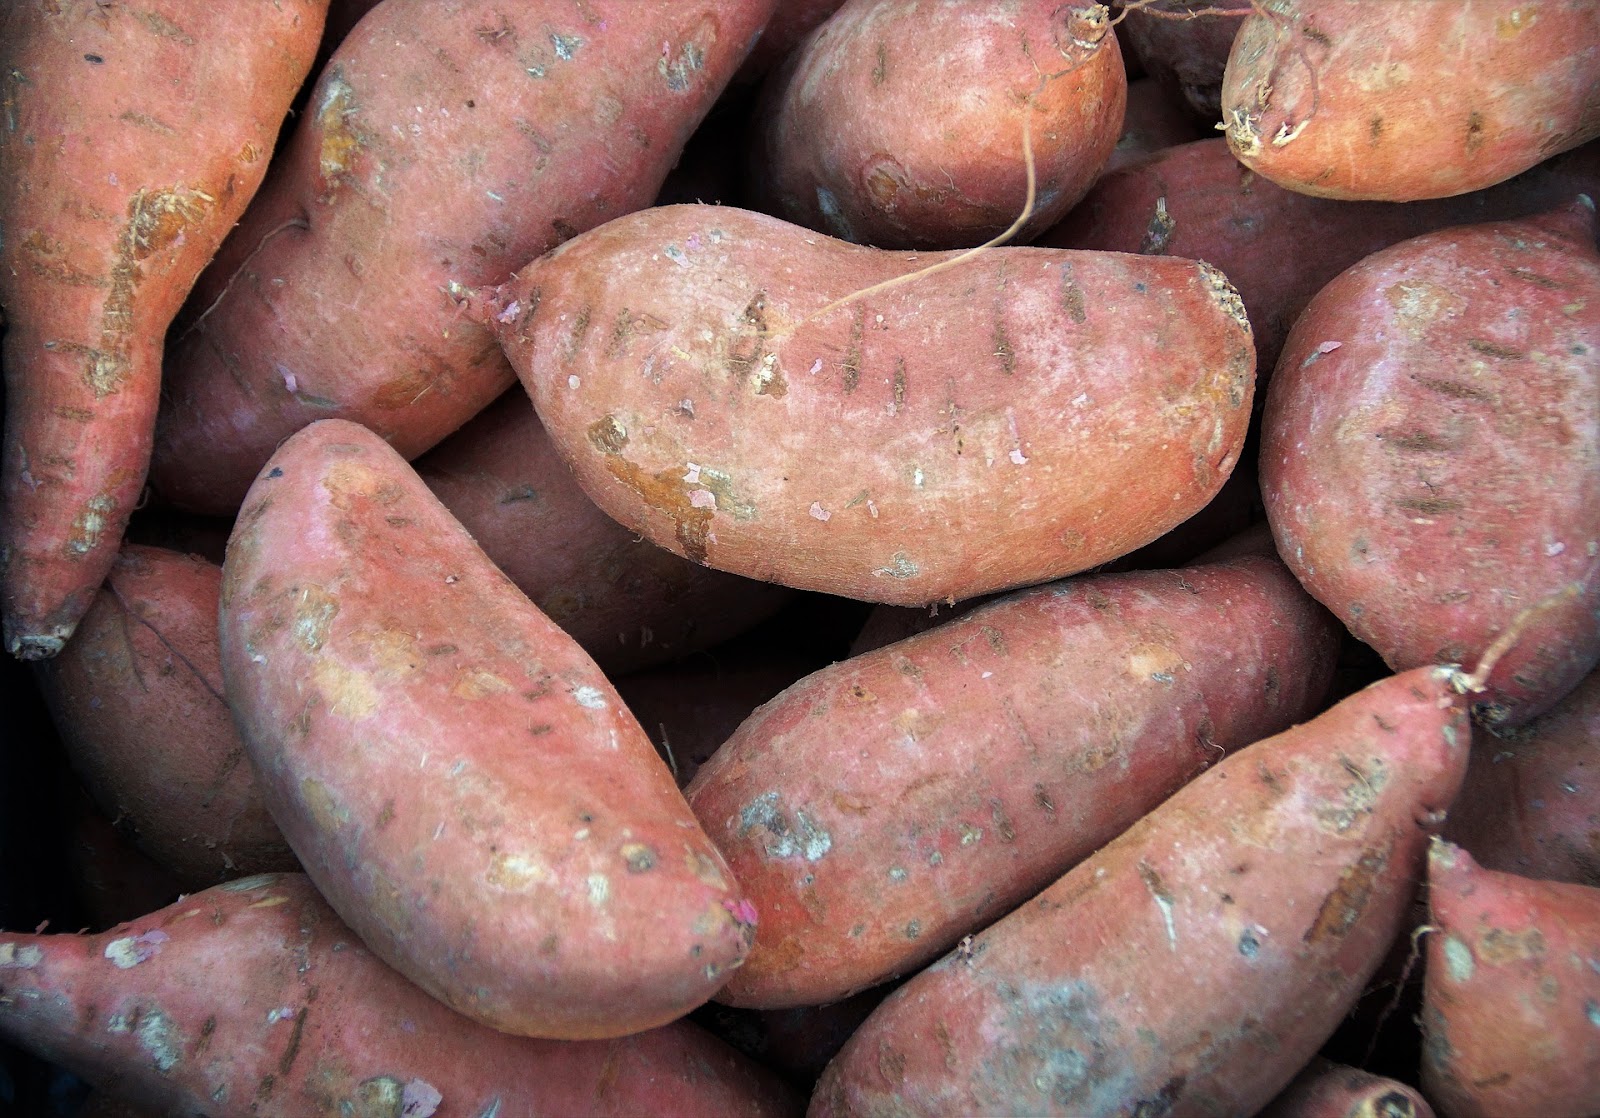 A bin of large sweet potatoes at the marketplace ready to be sold.